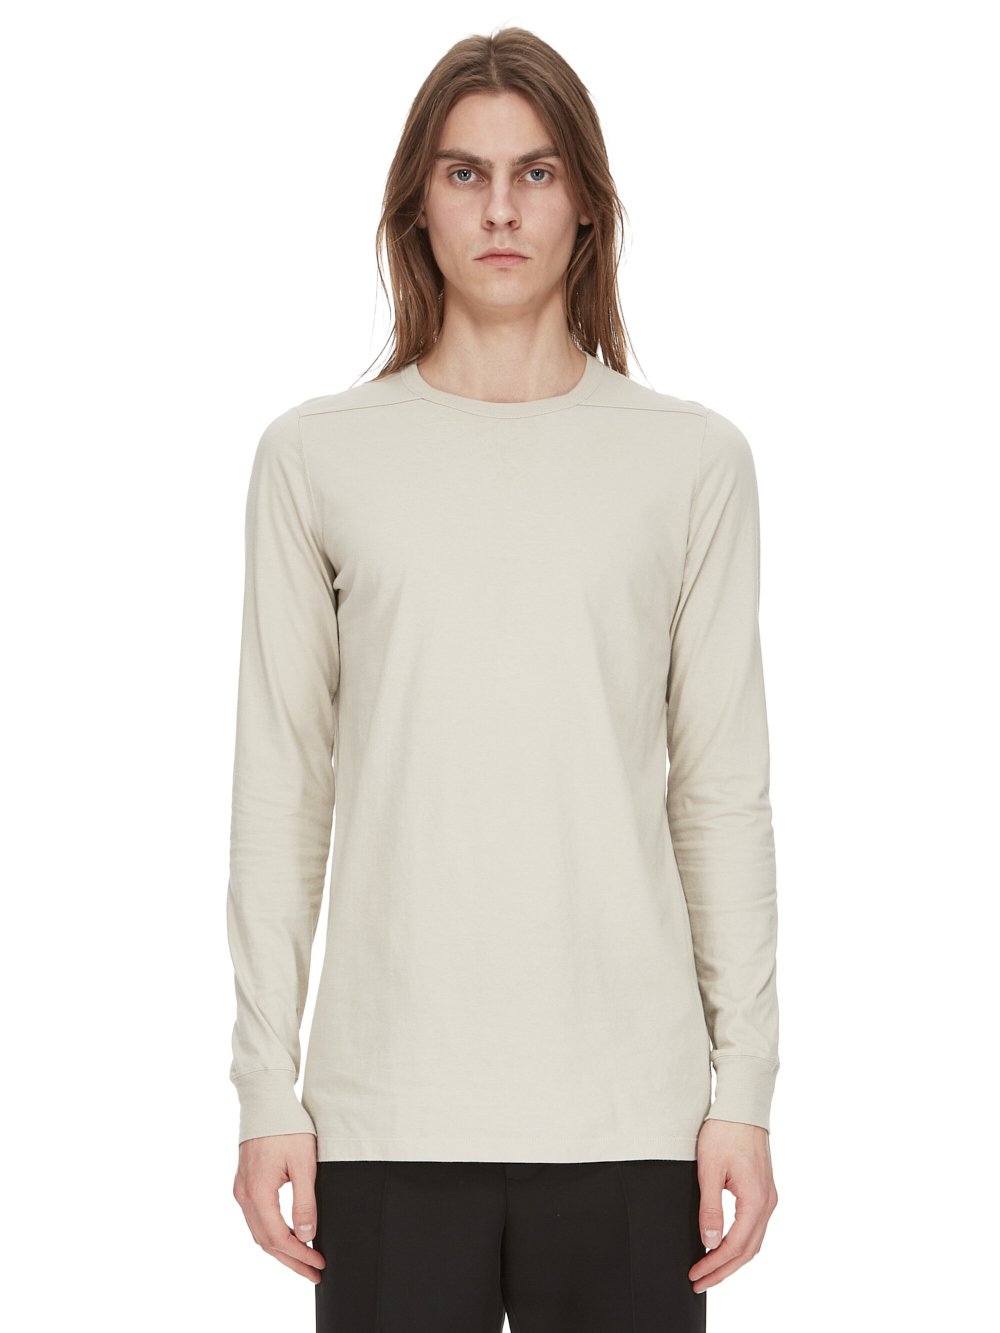 RICK OWENS FW23 LUXOR LEVEL LS T IN PEARL CLASSIC COTTON JERSEY